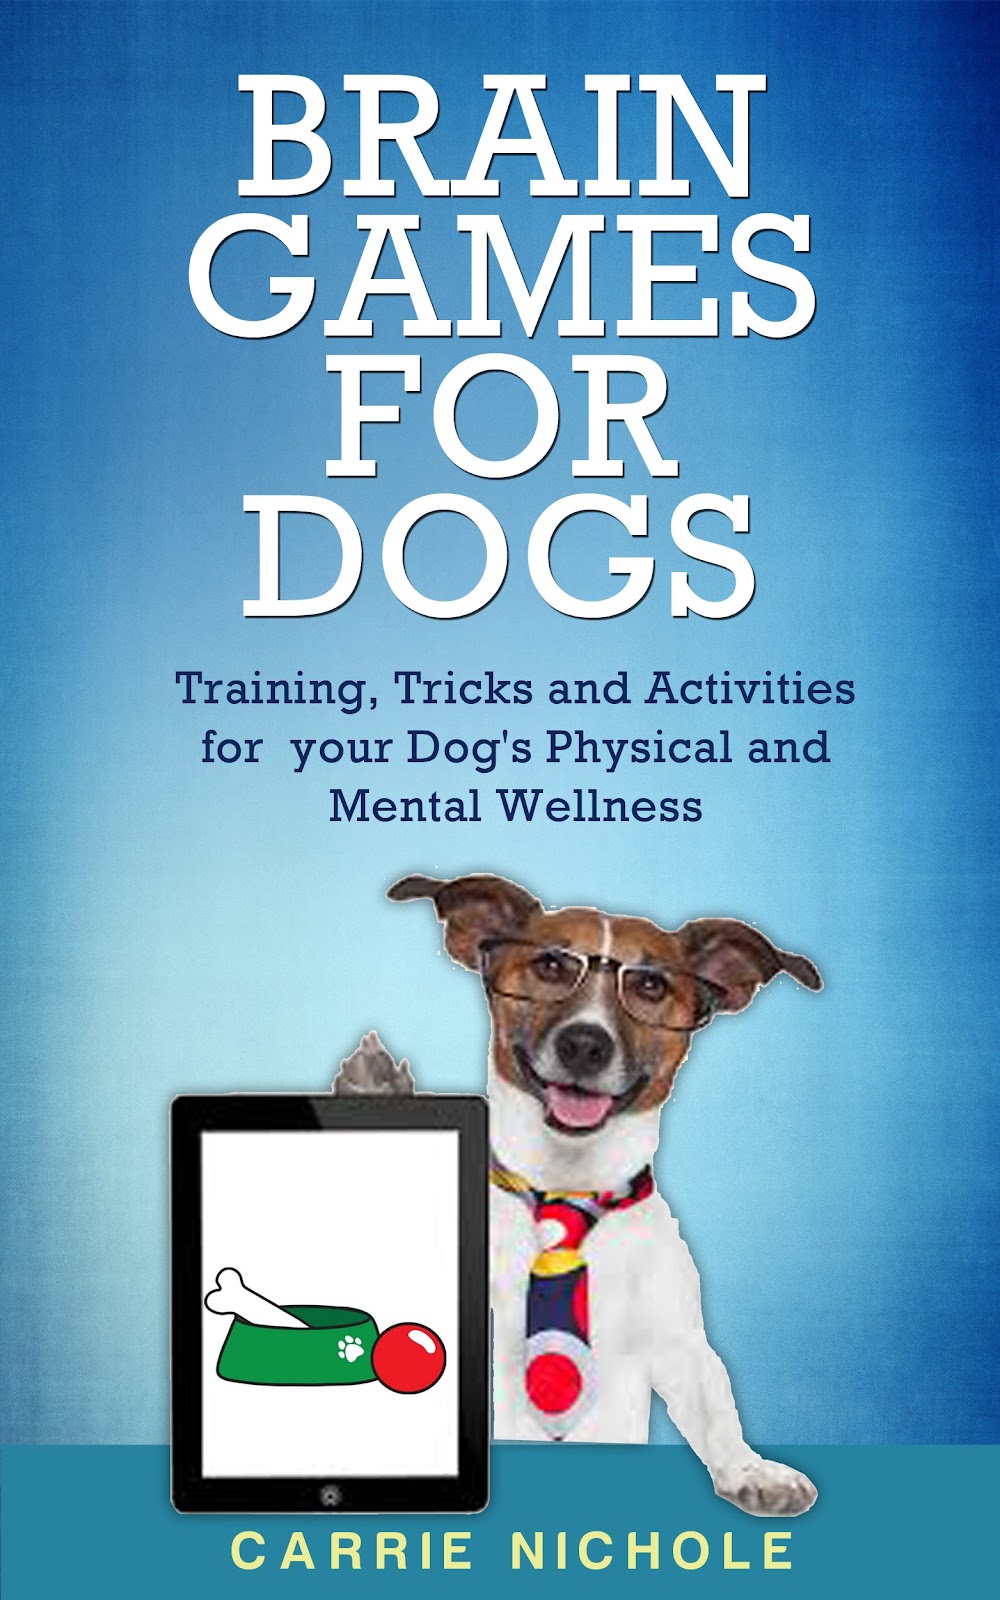 Premium Books - Brain Games for Dogs: Training, Tricks and Activities for your Dog’s Physical and Mental wellness( Dog training, Puppy training,Pet training books, Puppy ... games for dogs, How to train a dog Book 1)